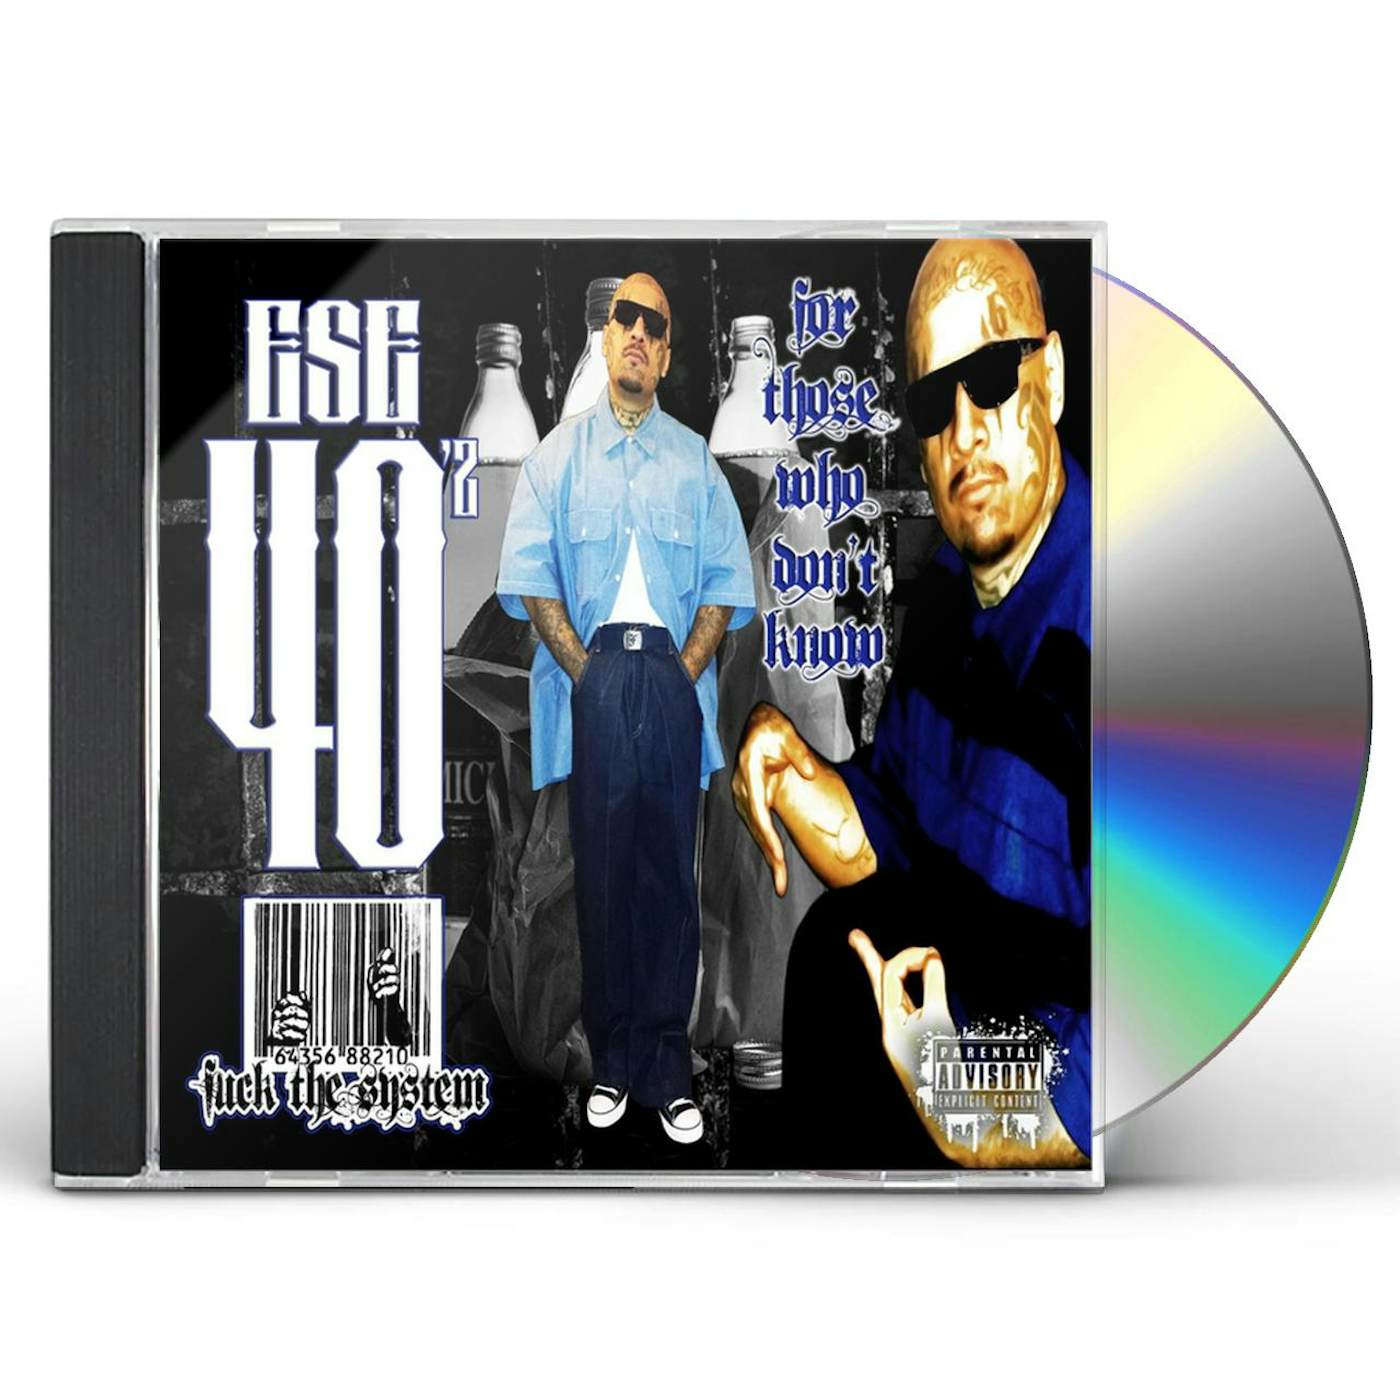 Ese 40'z FOR THOSE WHO DONT KNOW CD